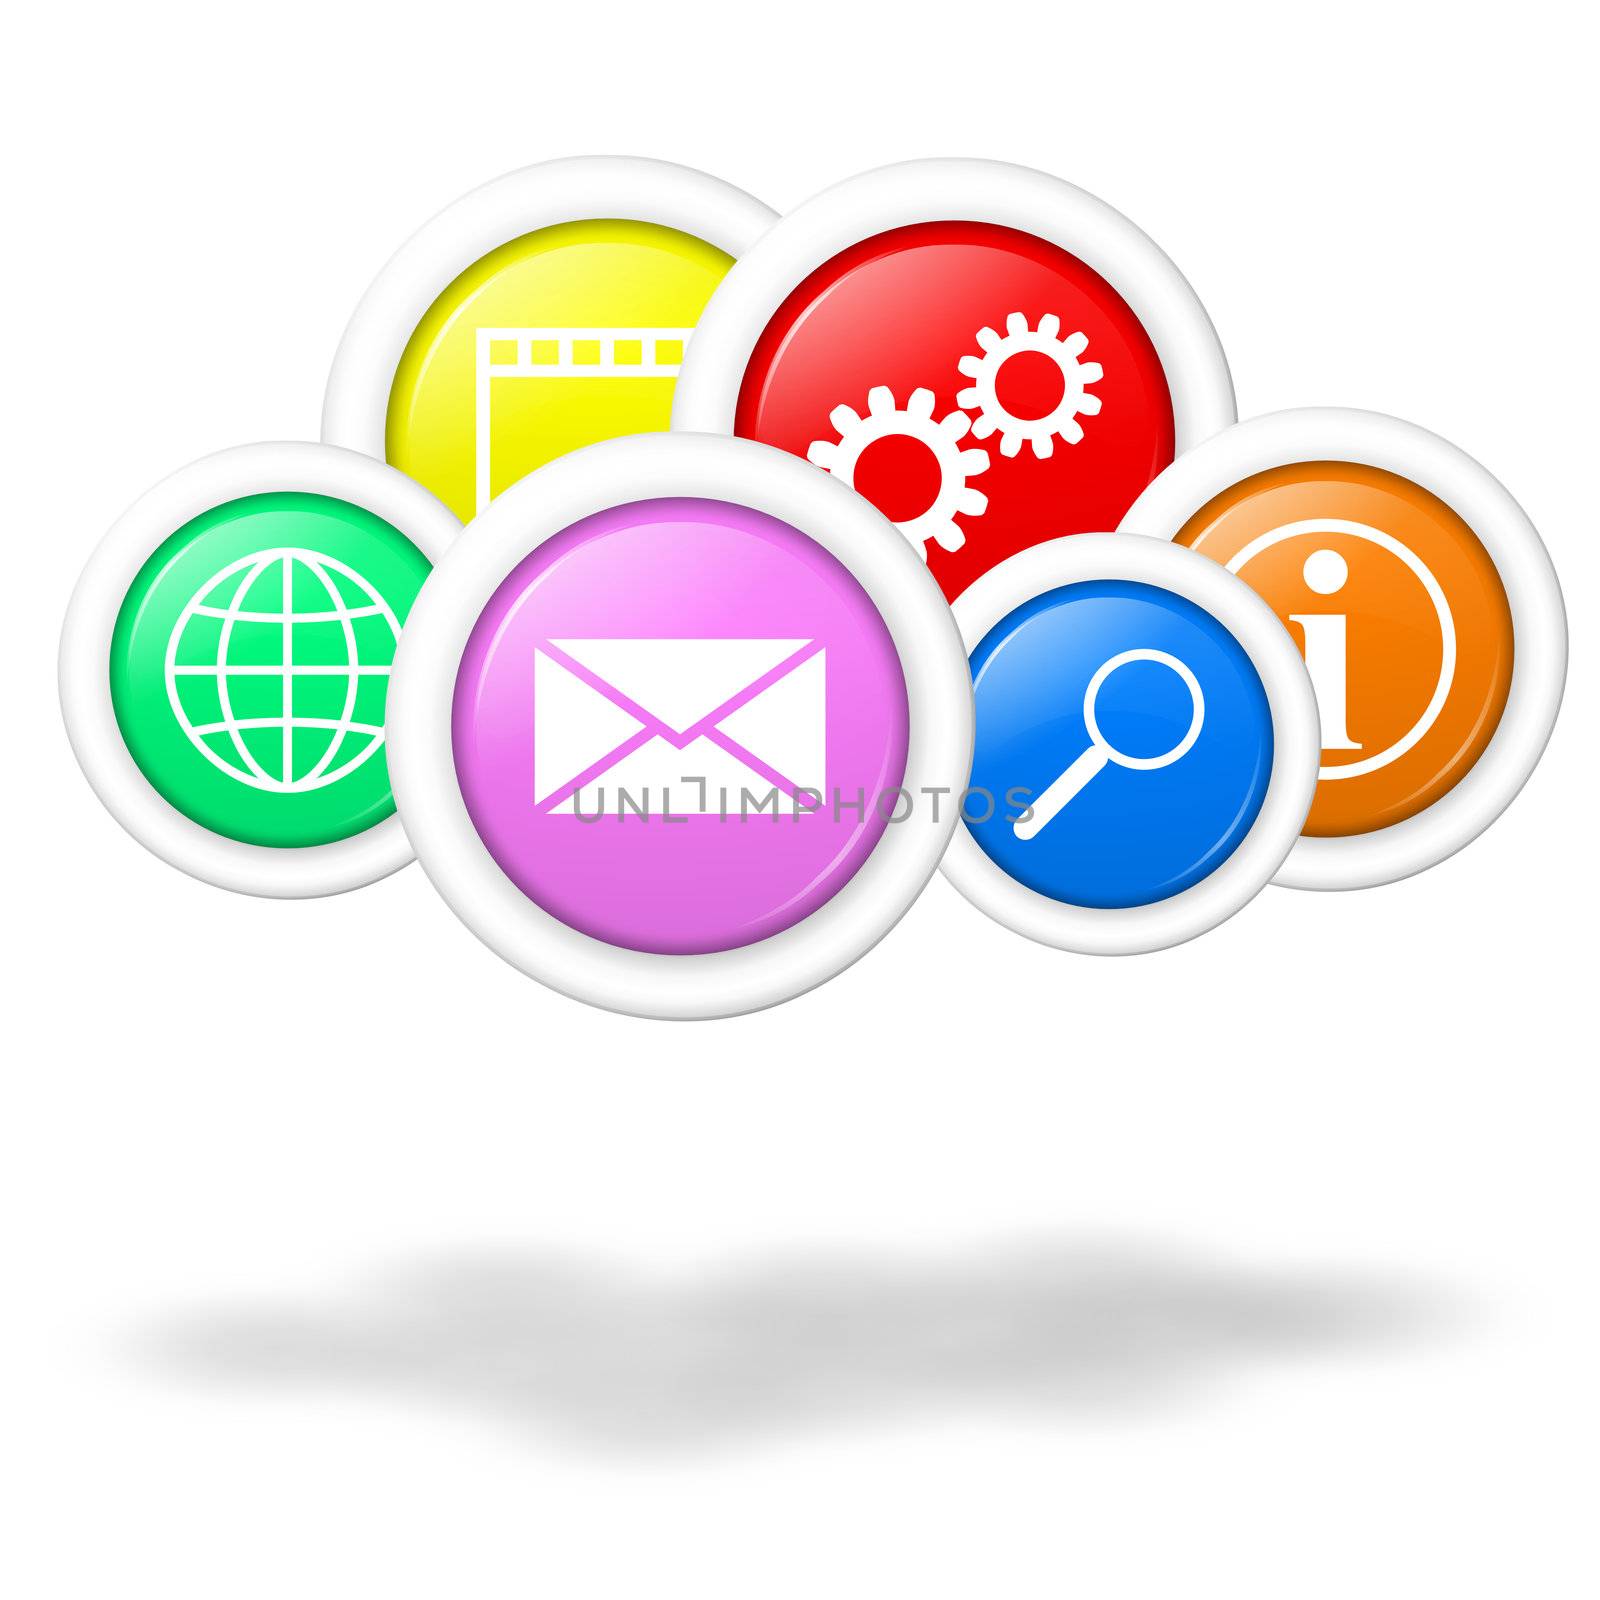 Cloud computing concept illustration formed by services and applications icons